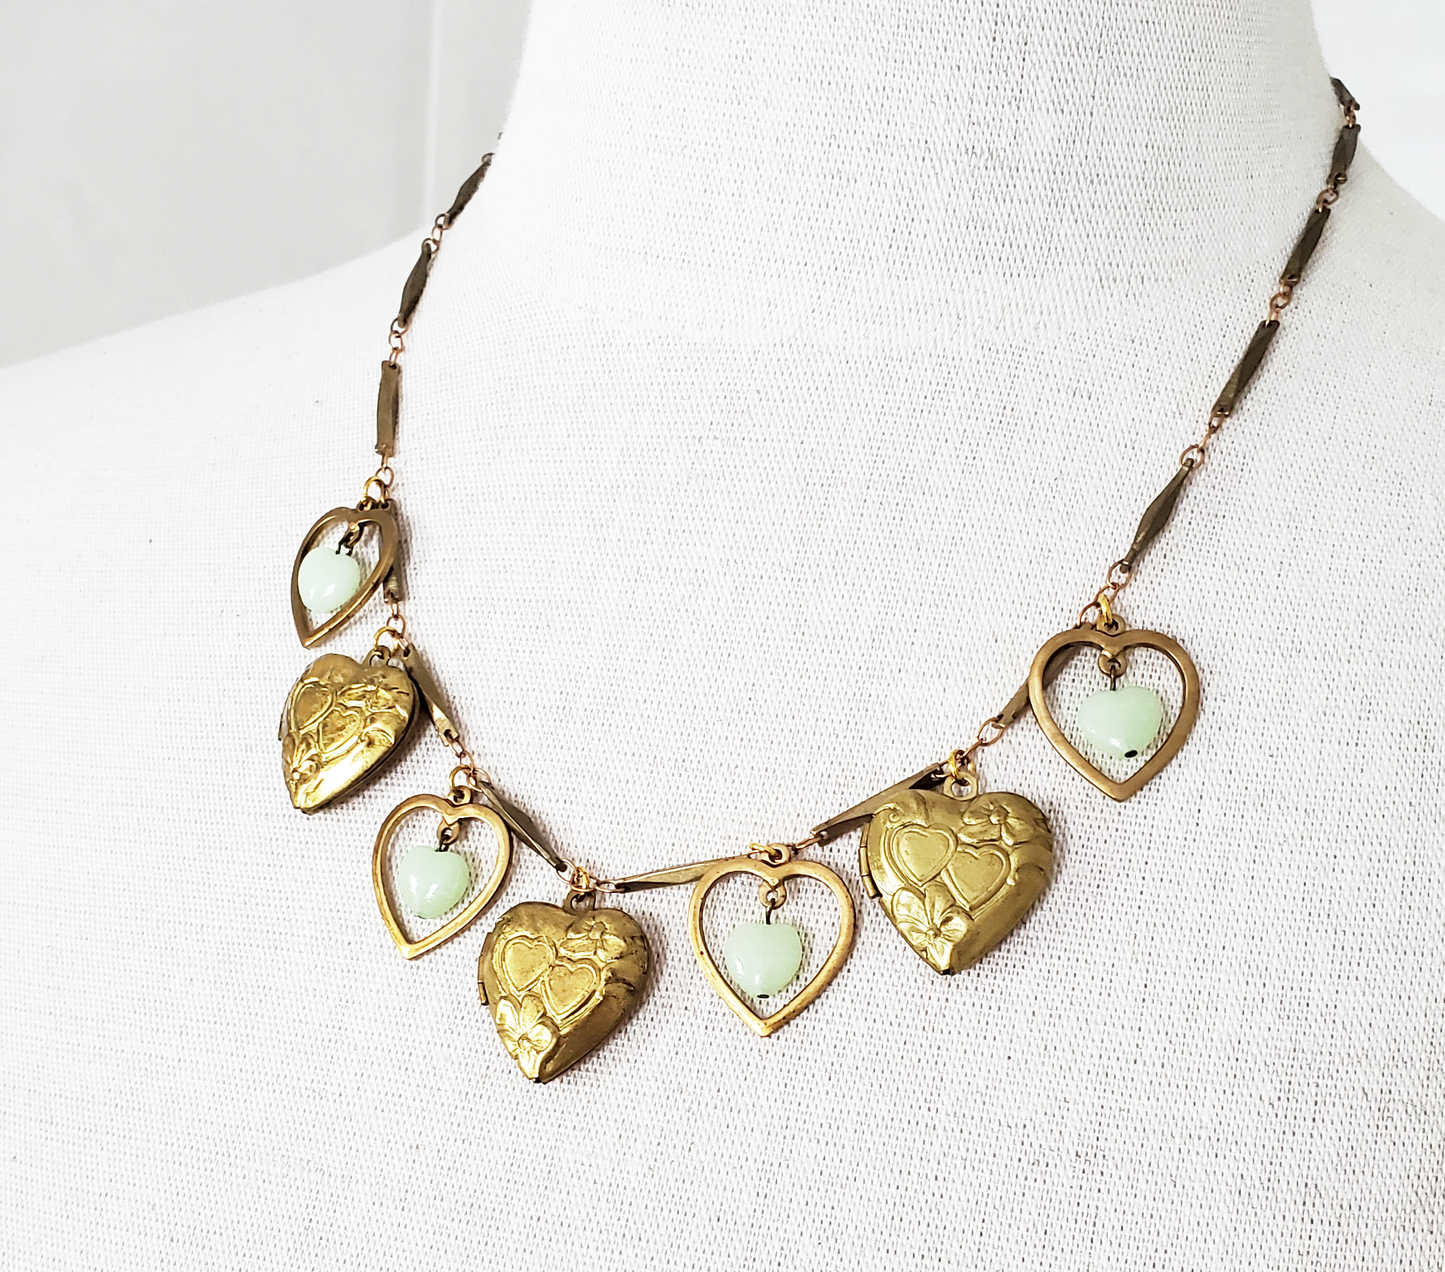 Old Heart Lockets and Czech Glass Necklace